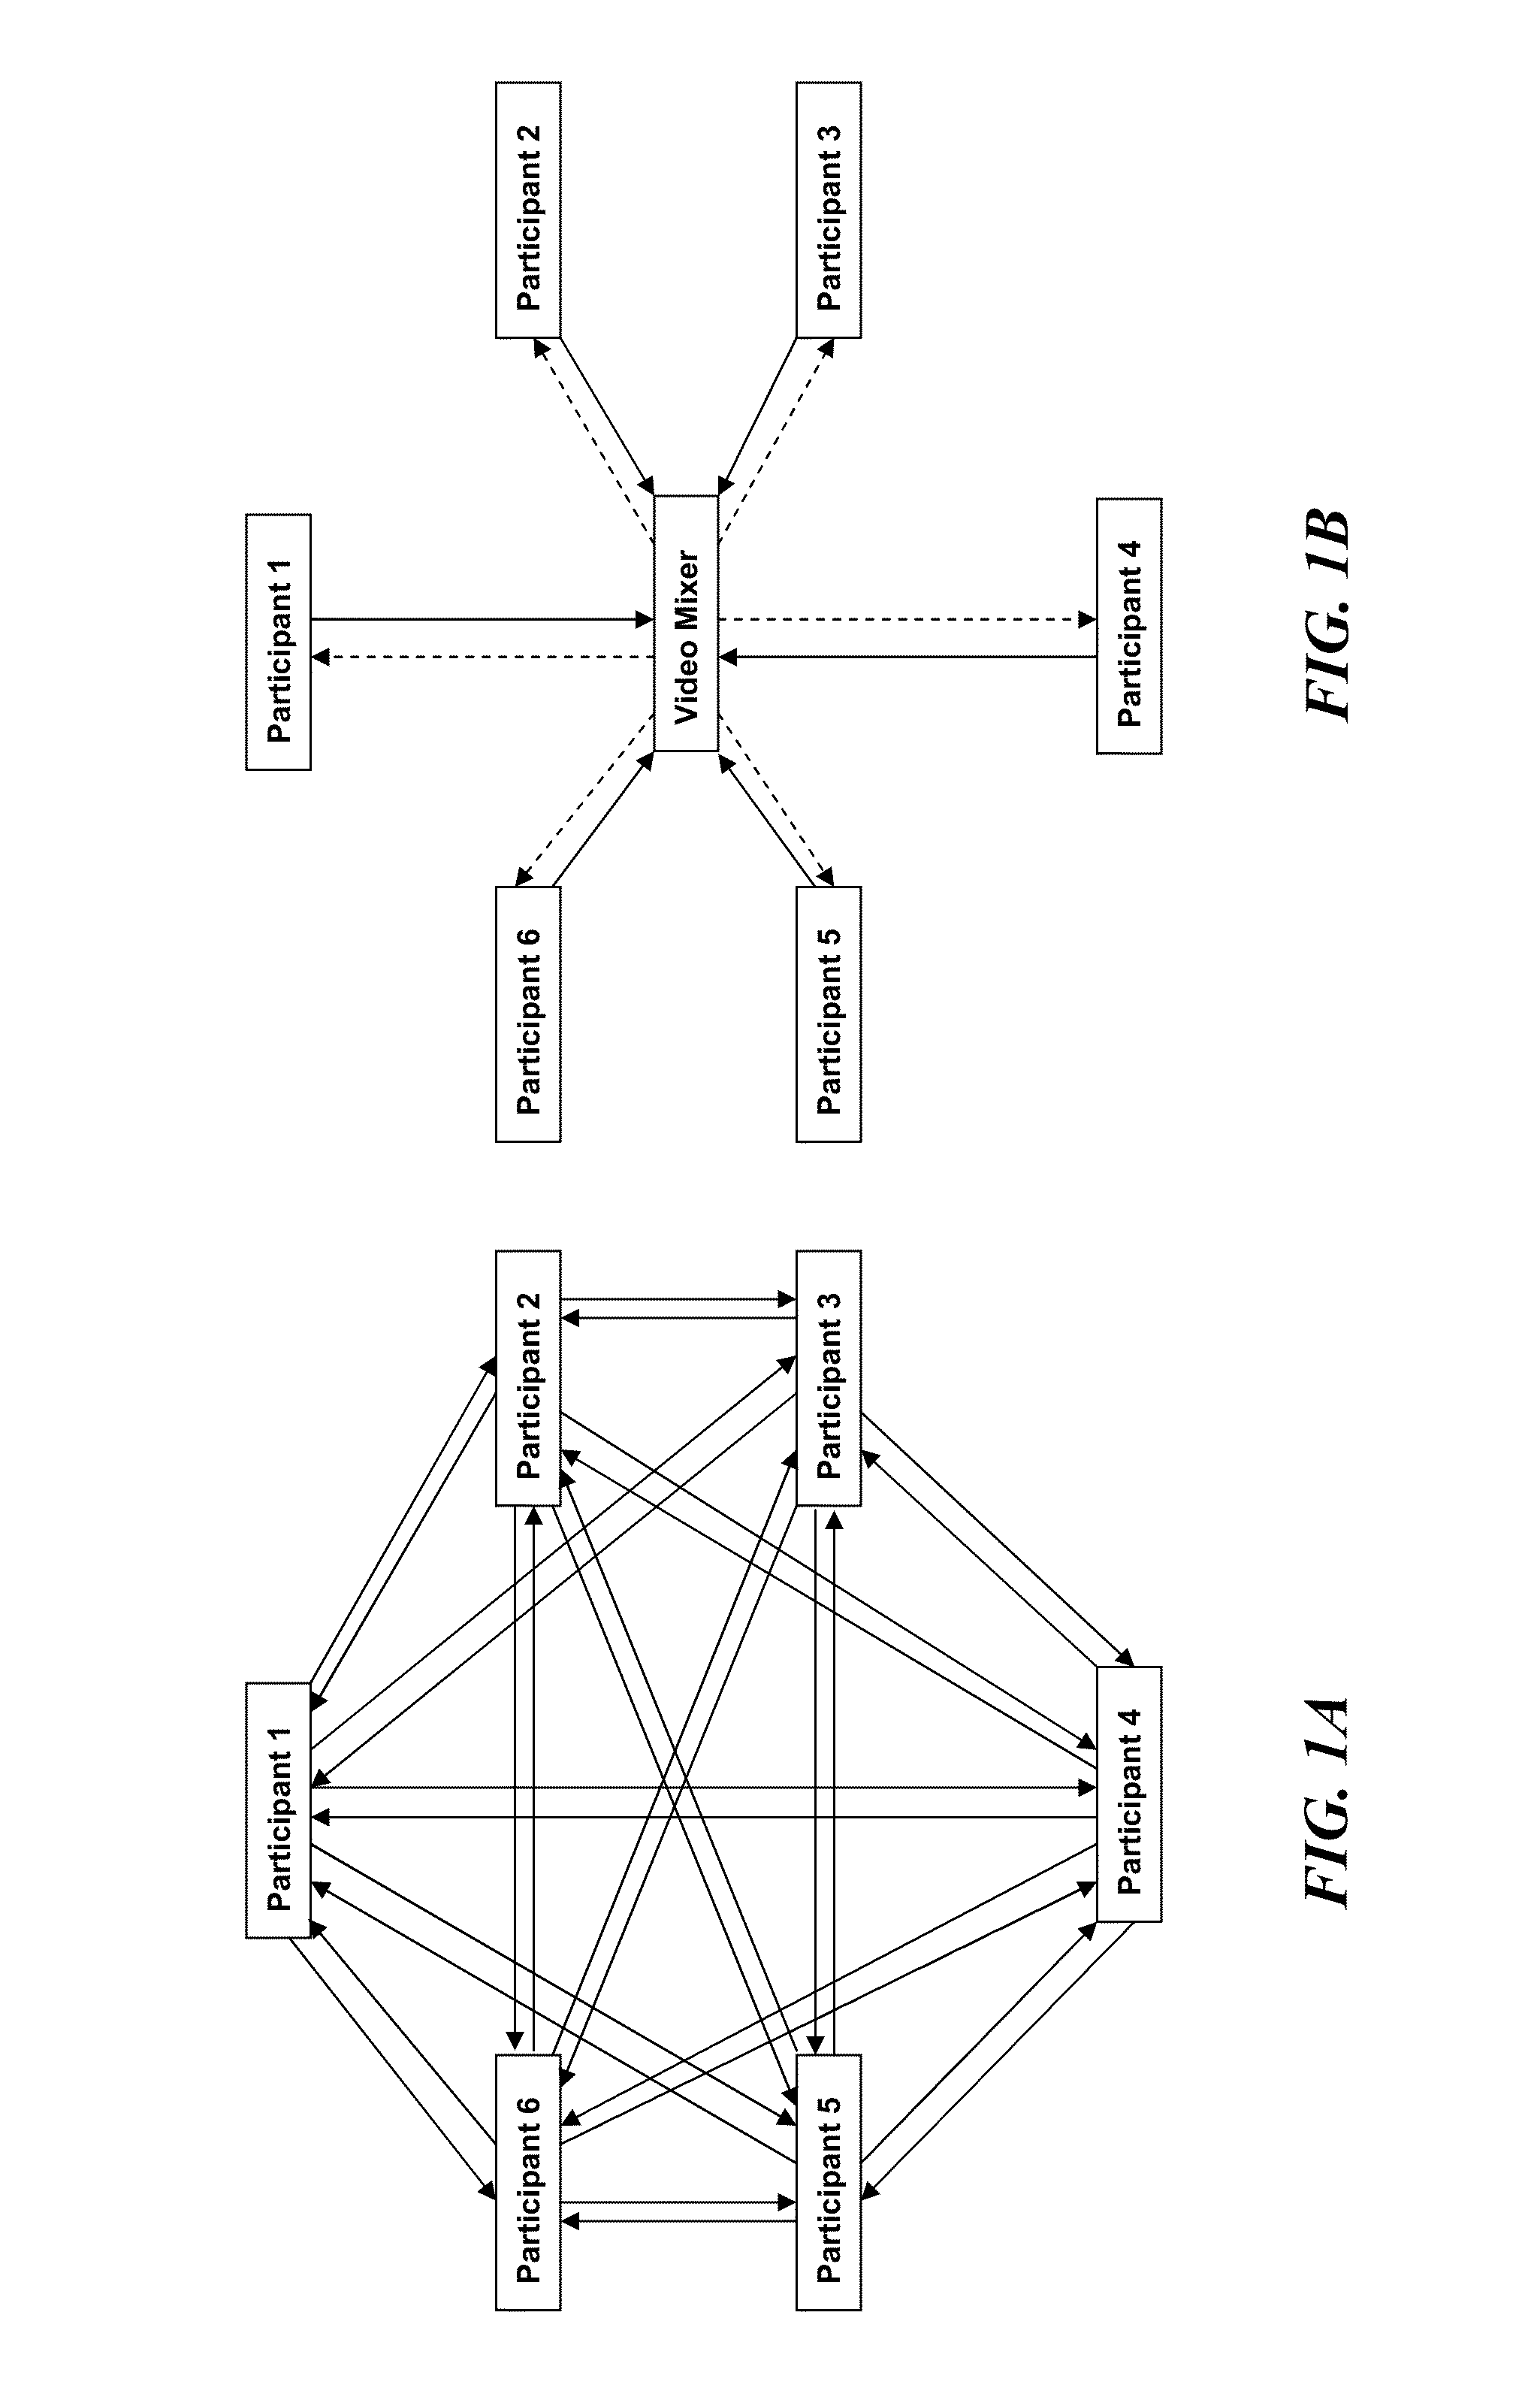 Systems and methods for providing video conferencing services via an ethernet adapter